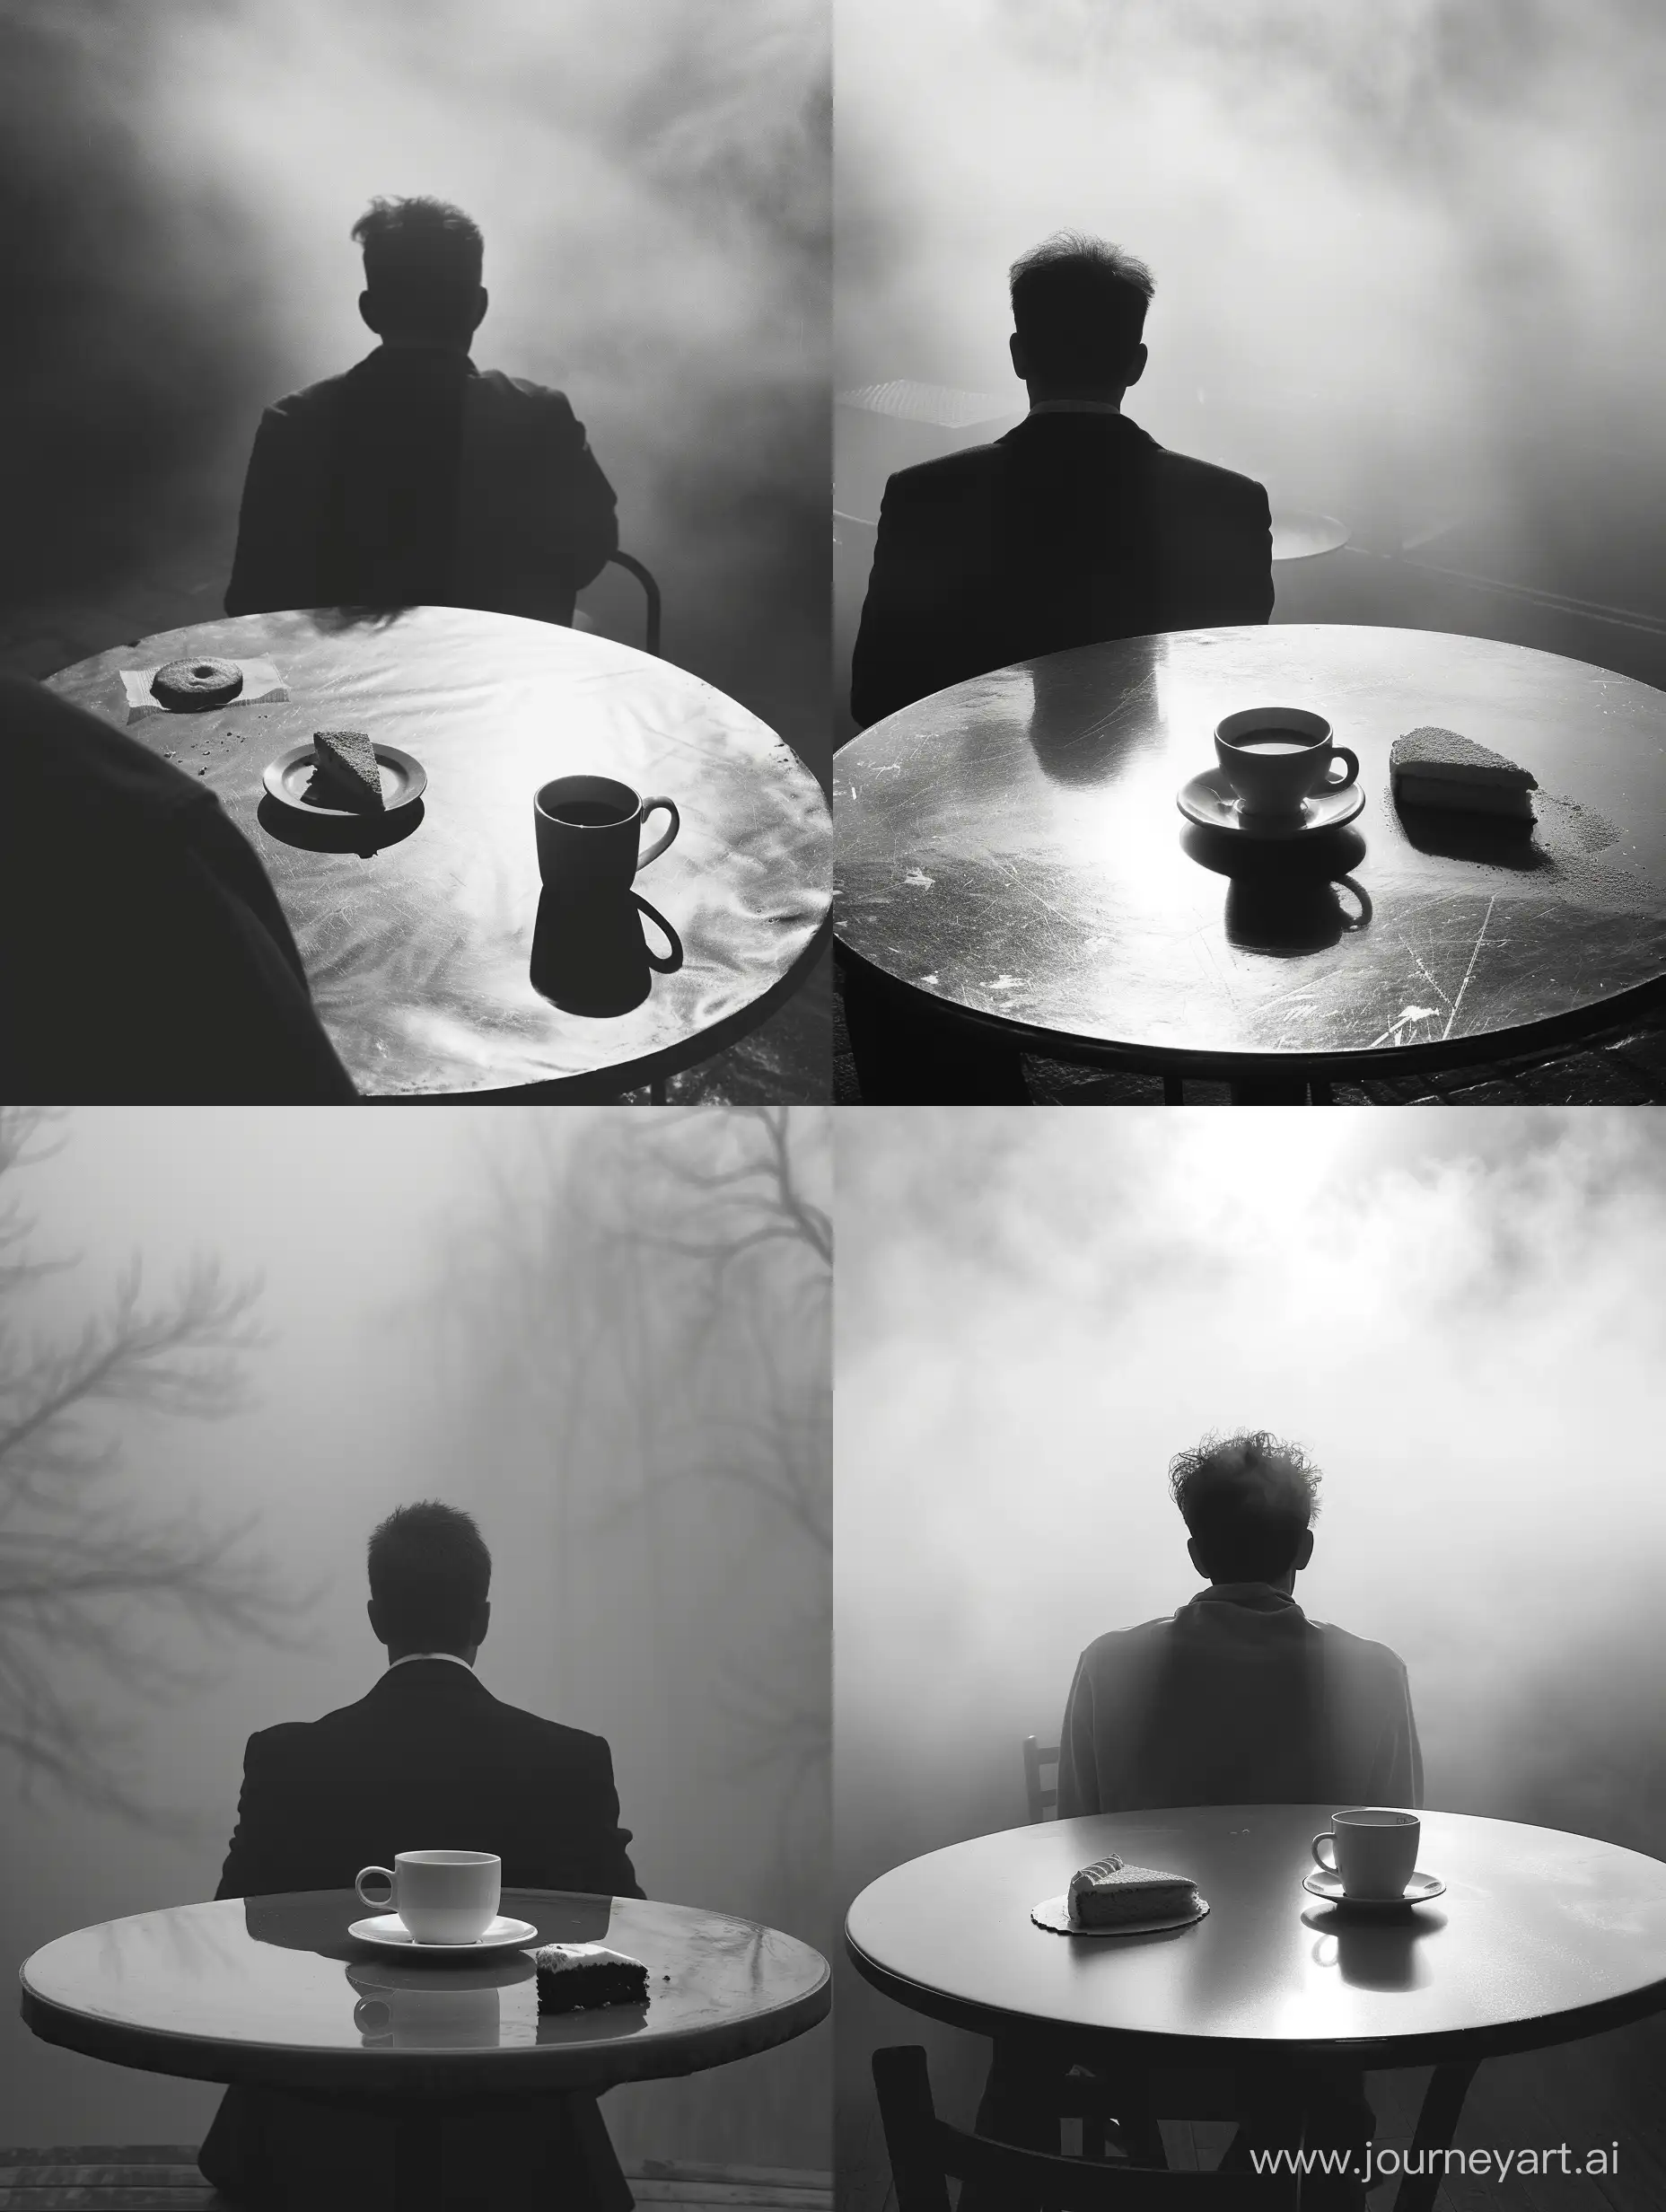 Solitude-at-Dawn-Enigmatic-Figure-Sips-Coffee-by-Round-Table